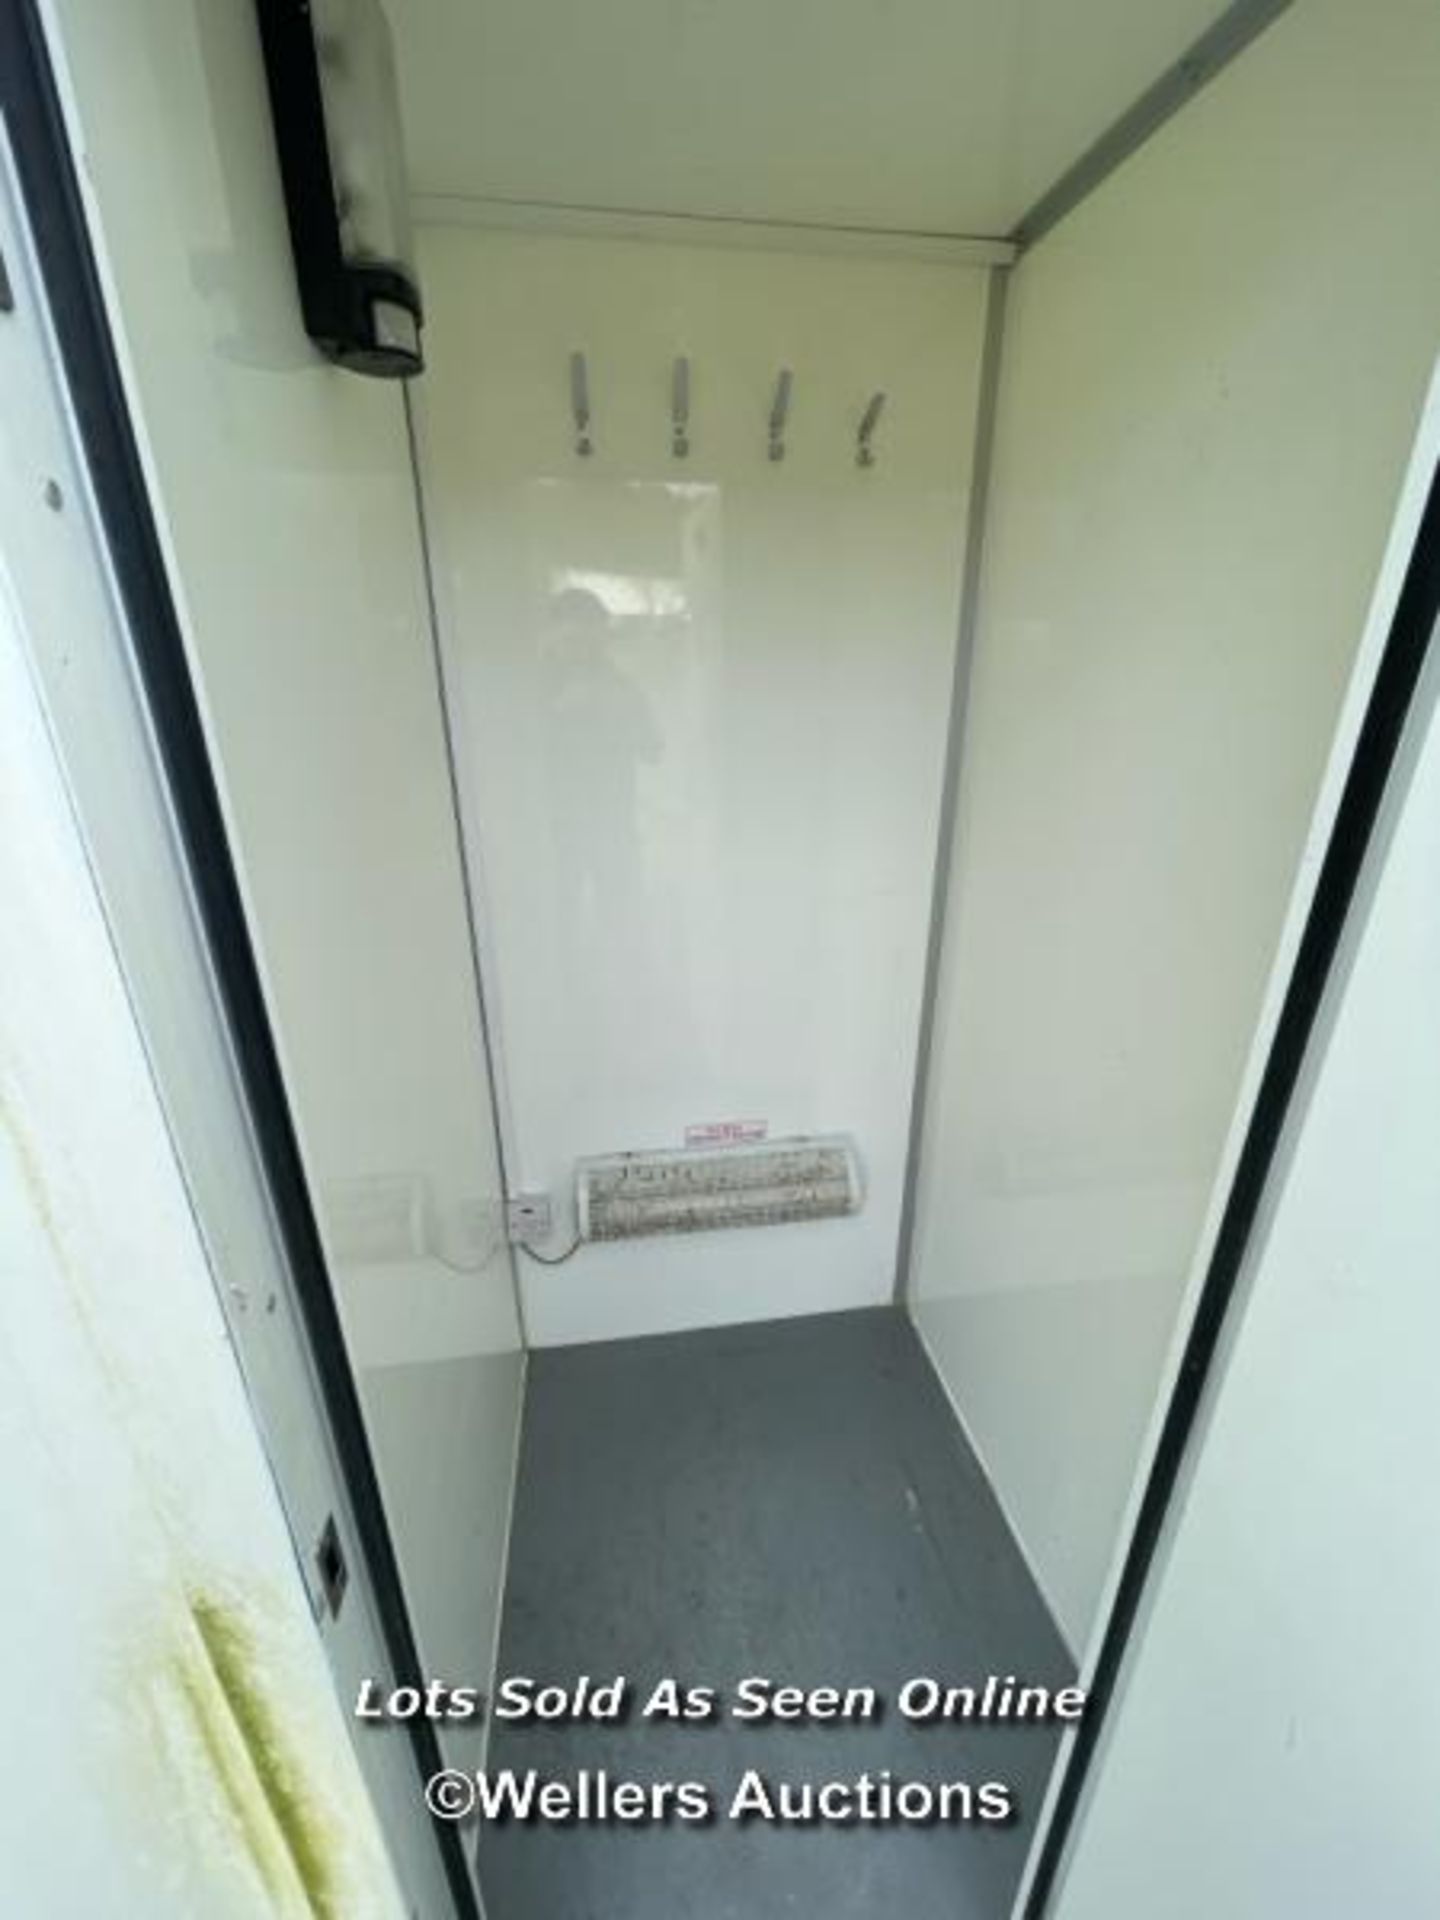 6 PERSON 12 X 7.5FT AJC EASY CABIN TOWABLE WELFARE UNIT, INCLUDES WASH BASIN, KETTLE, MICROWAVE, - Image 11 of 15